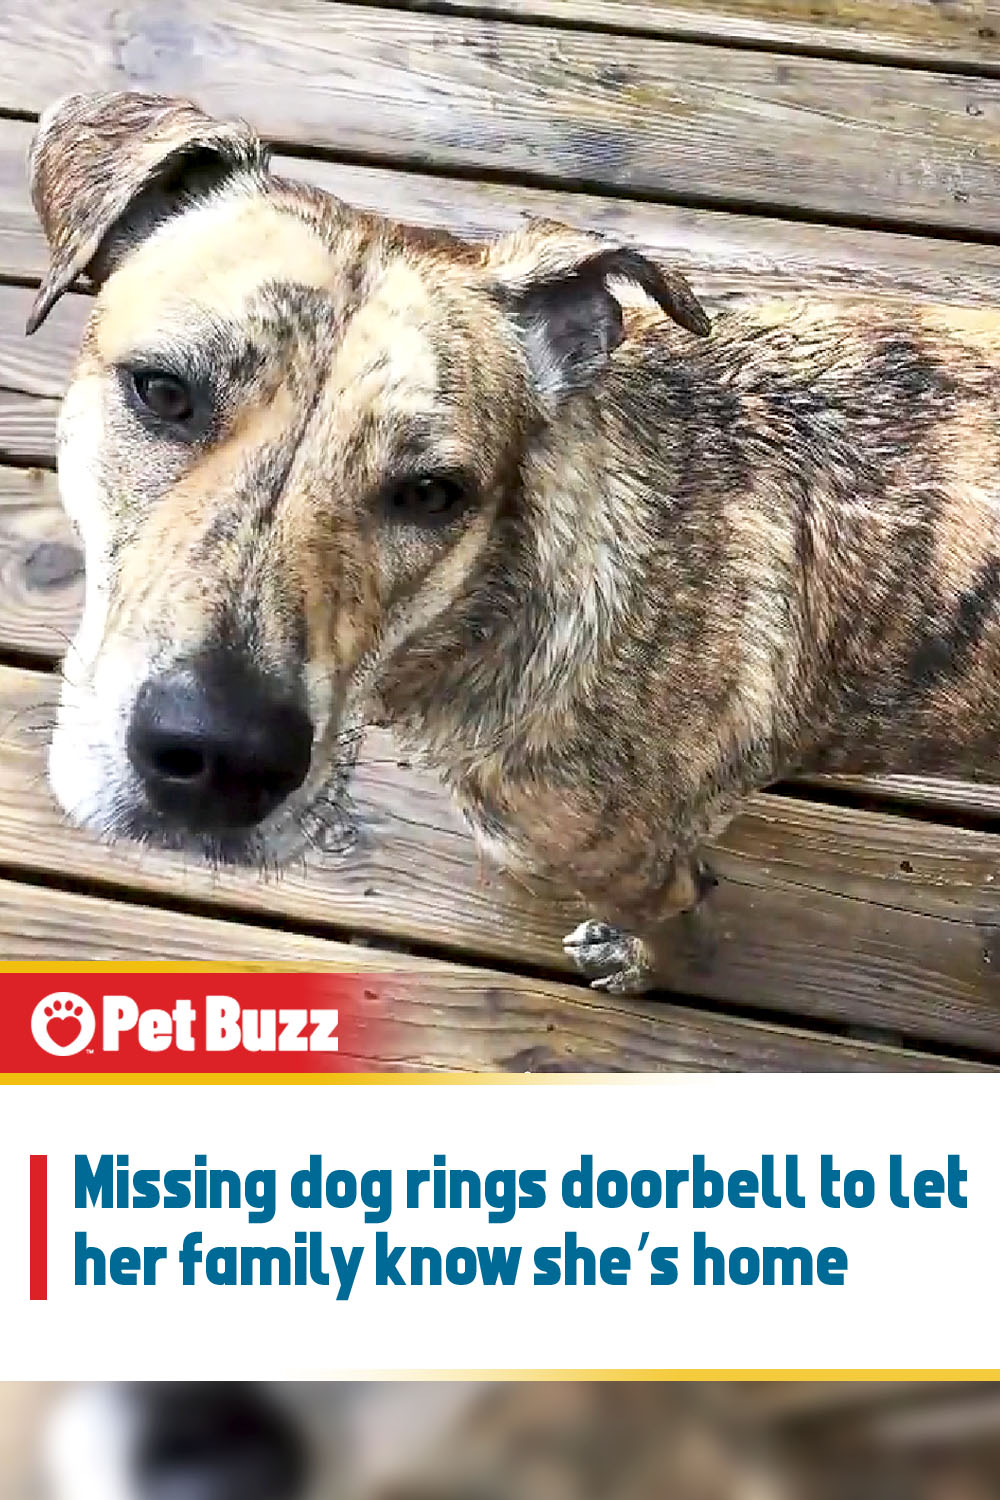 Missing dog rings doorbell to let her family know she’s home